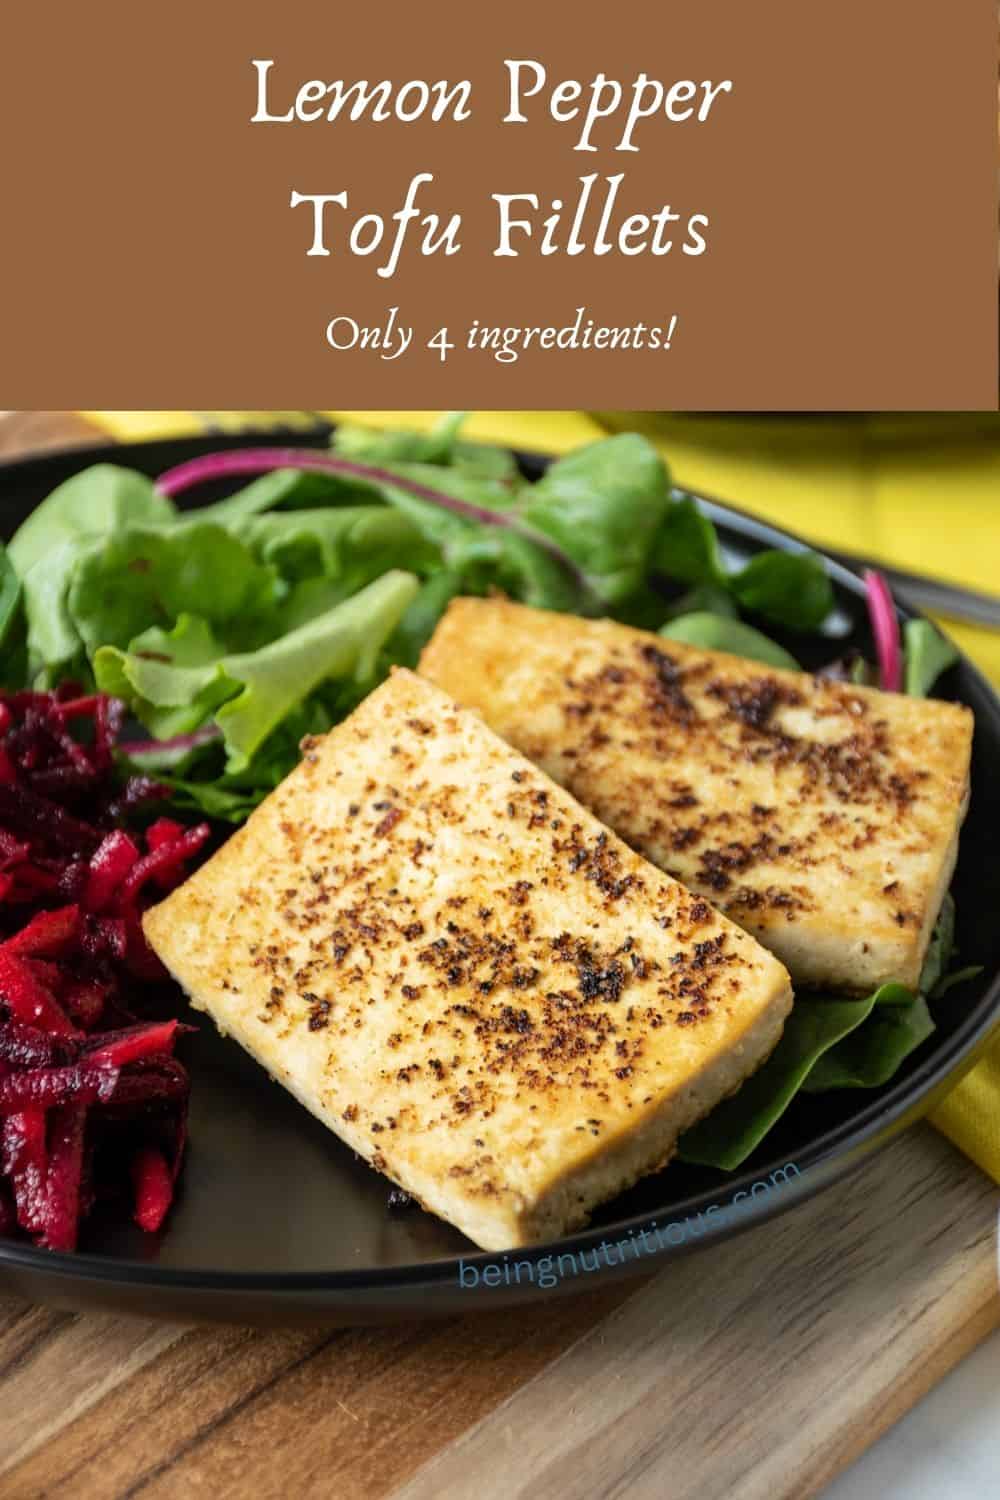 Plate with 2 slices of cooked tofu over a bed of greens, with a side of shredded beet salad. Text overlay: Lemon Pepper Tofu Fillets; only 4 ingredients!